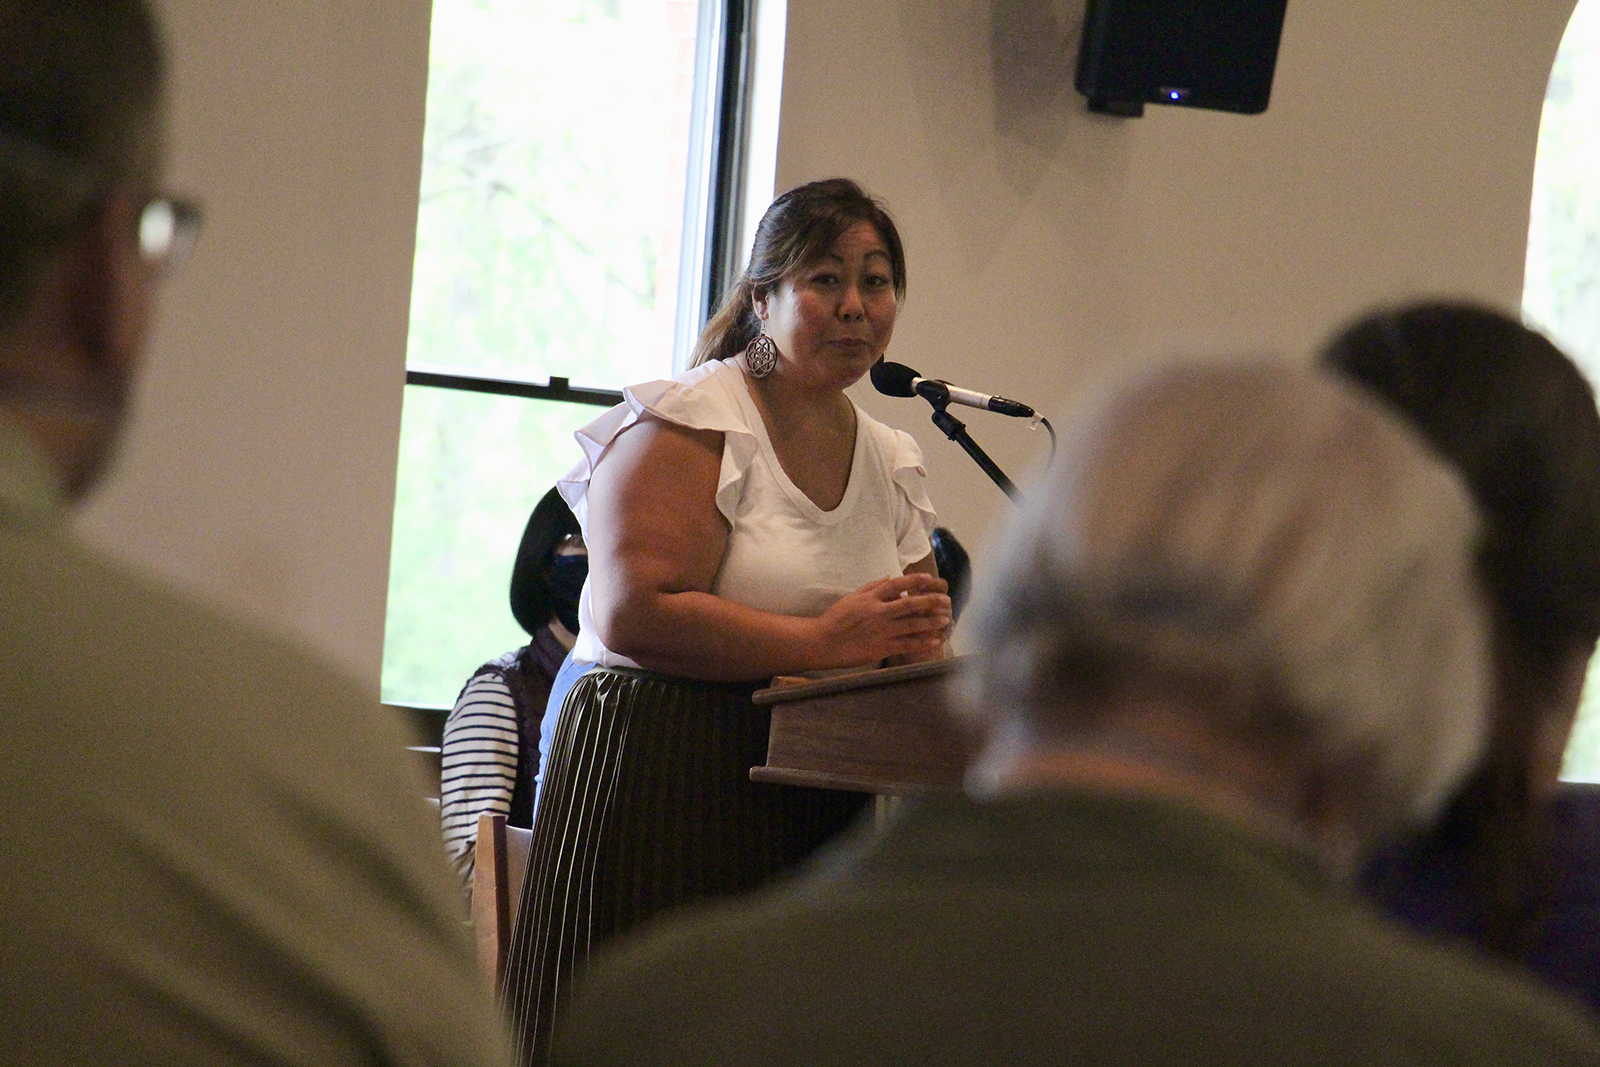 Reverend Juliet Liu speaks to the congregation at Life on the Vine Church in Long Grove, Illinois on May 15, 2022. RNS Photo by Emily McFarlan Miller